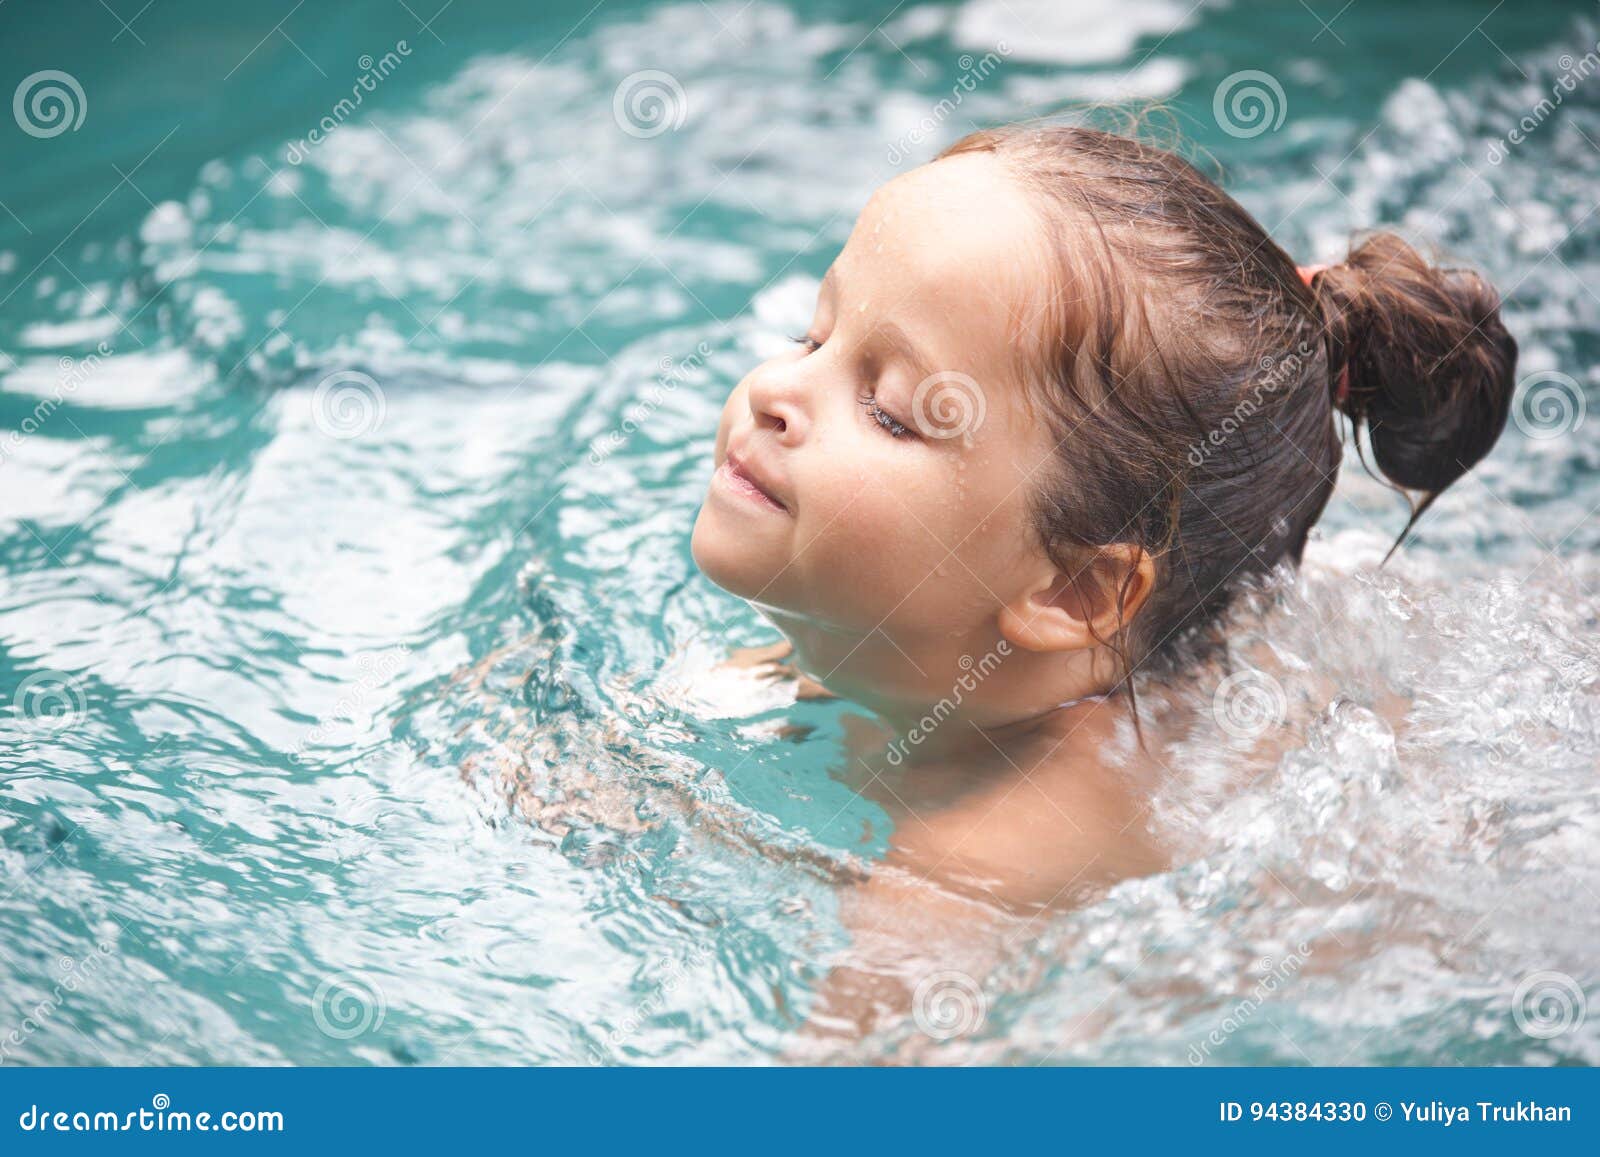 Girl In A Swimming Pool Image